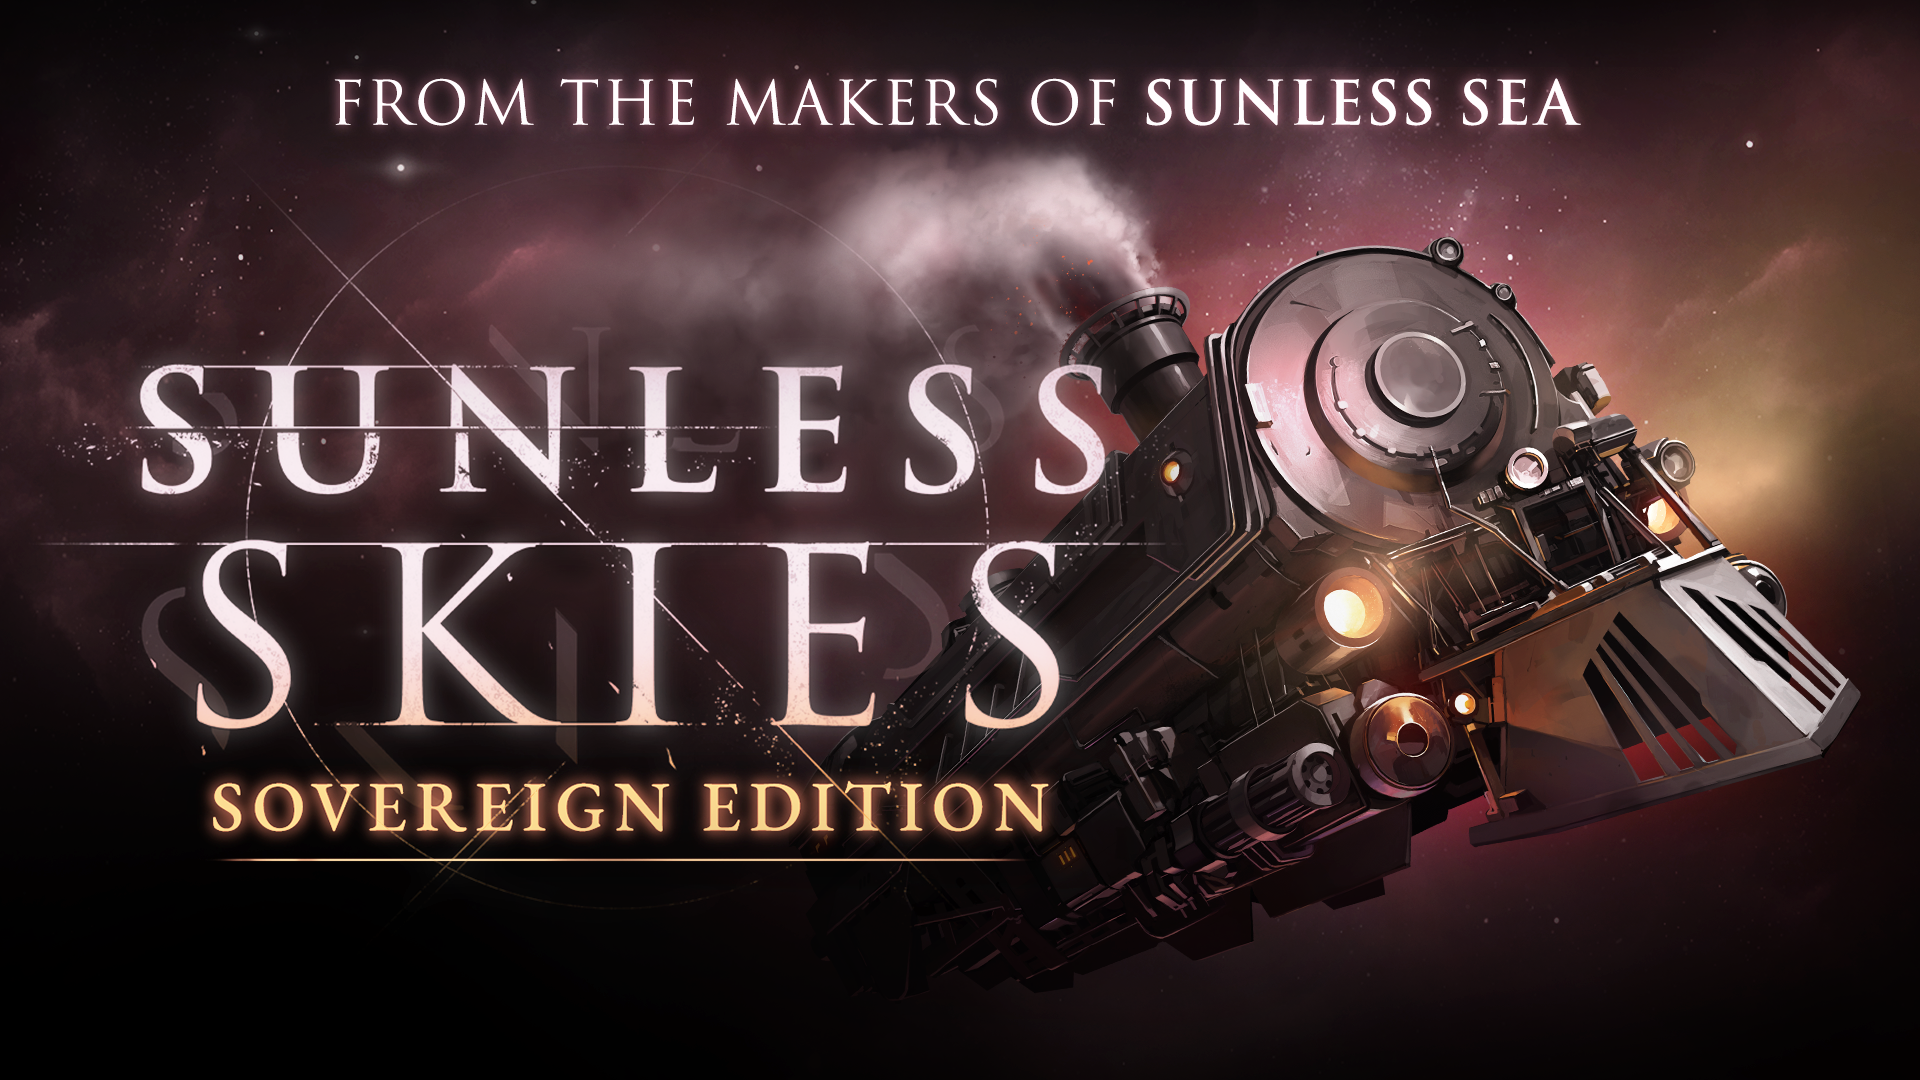 sunless sea soulless